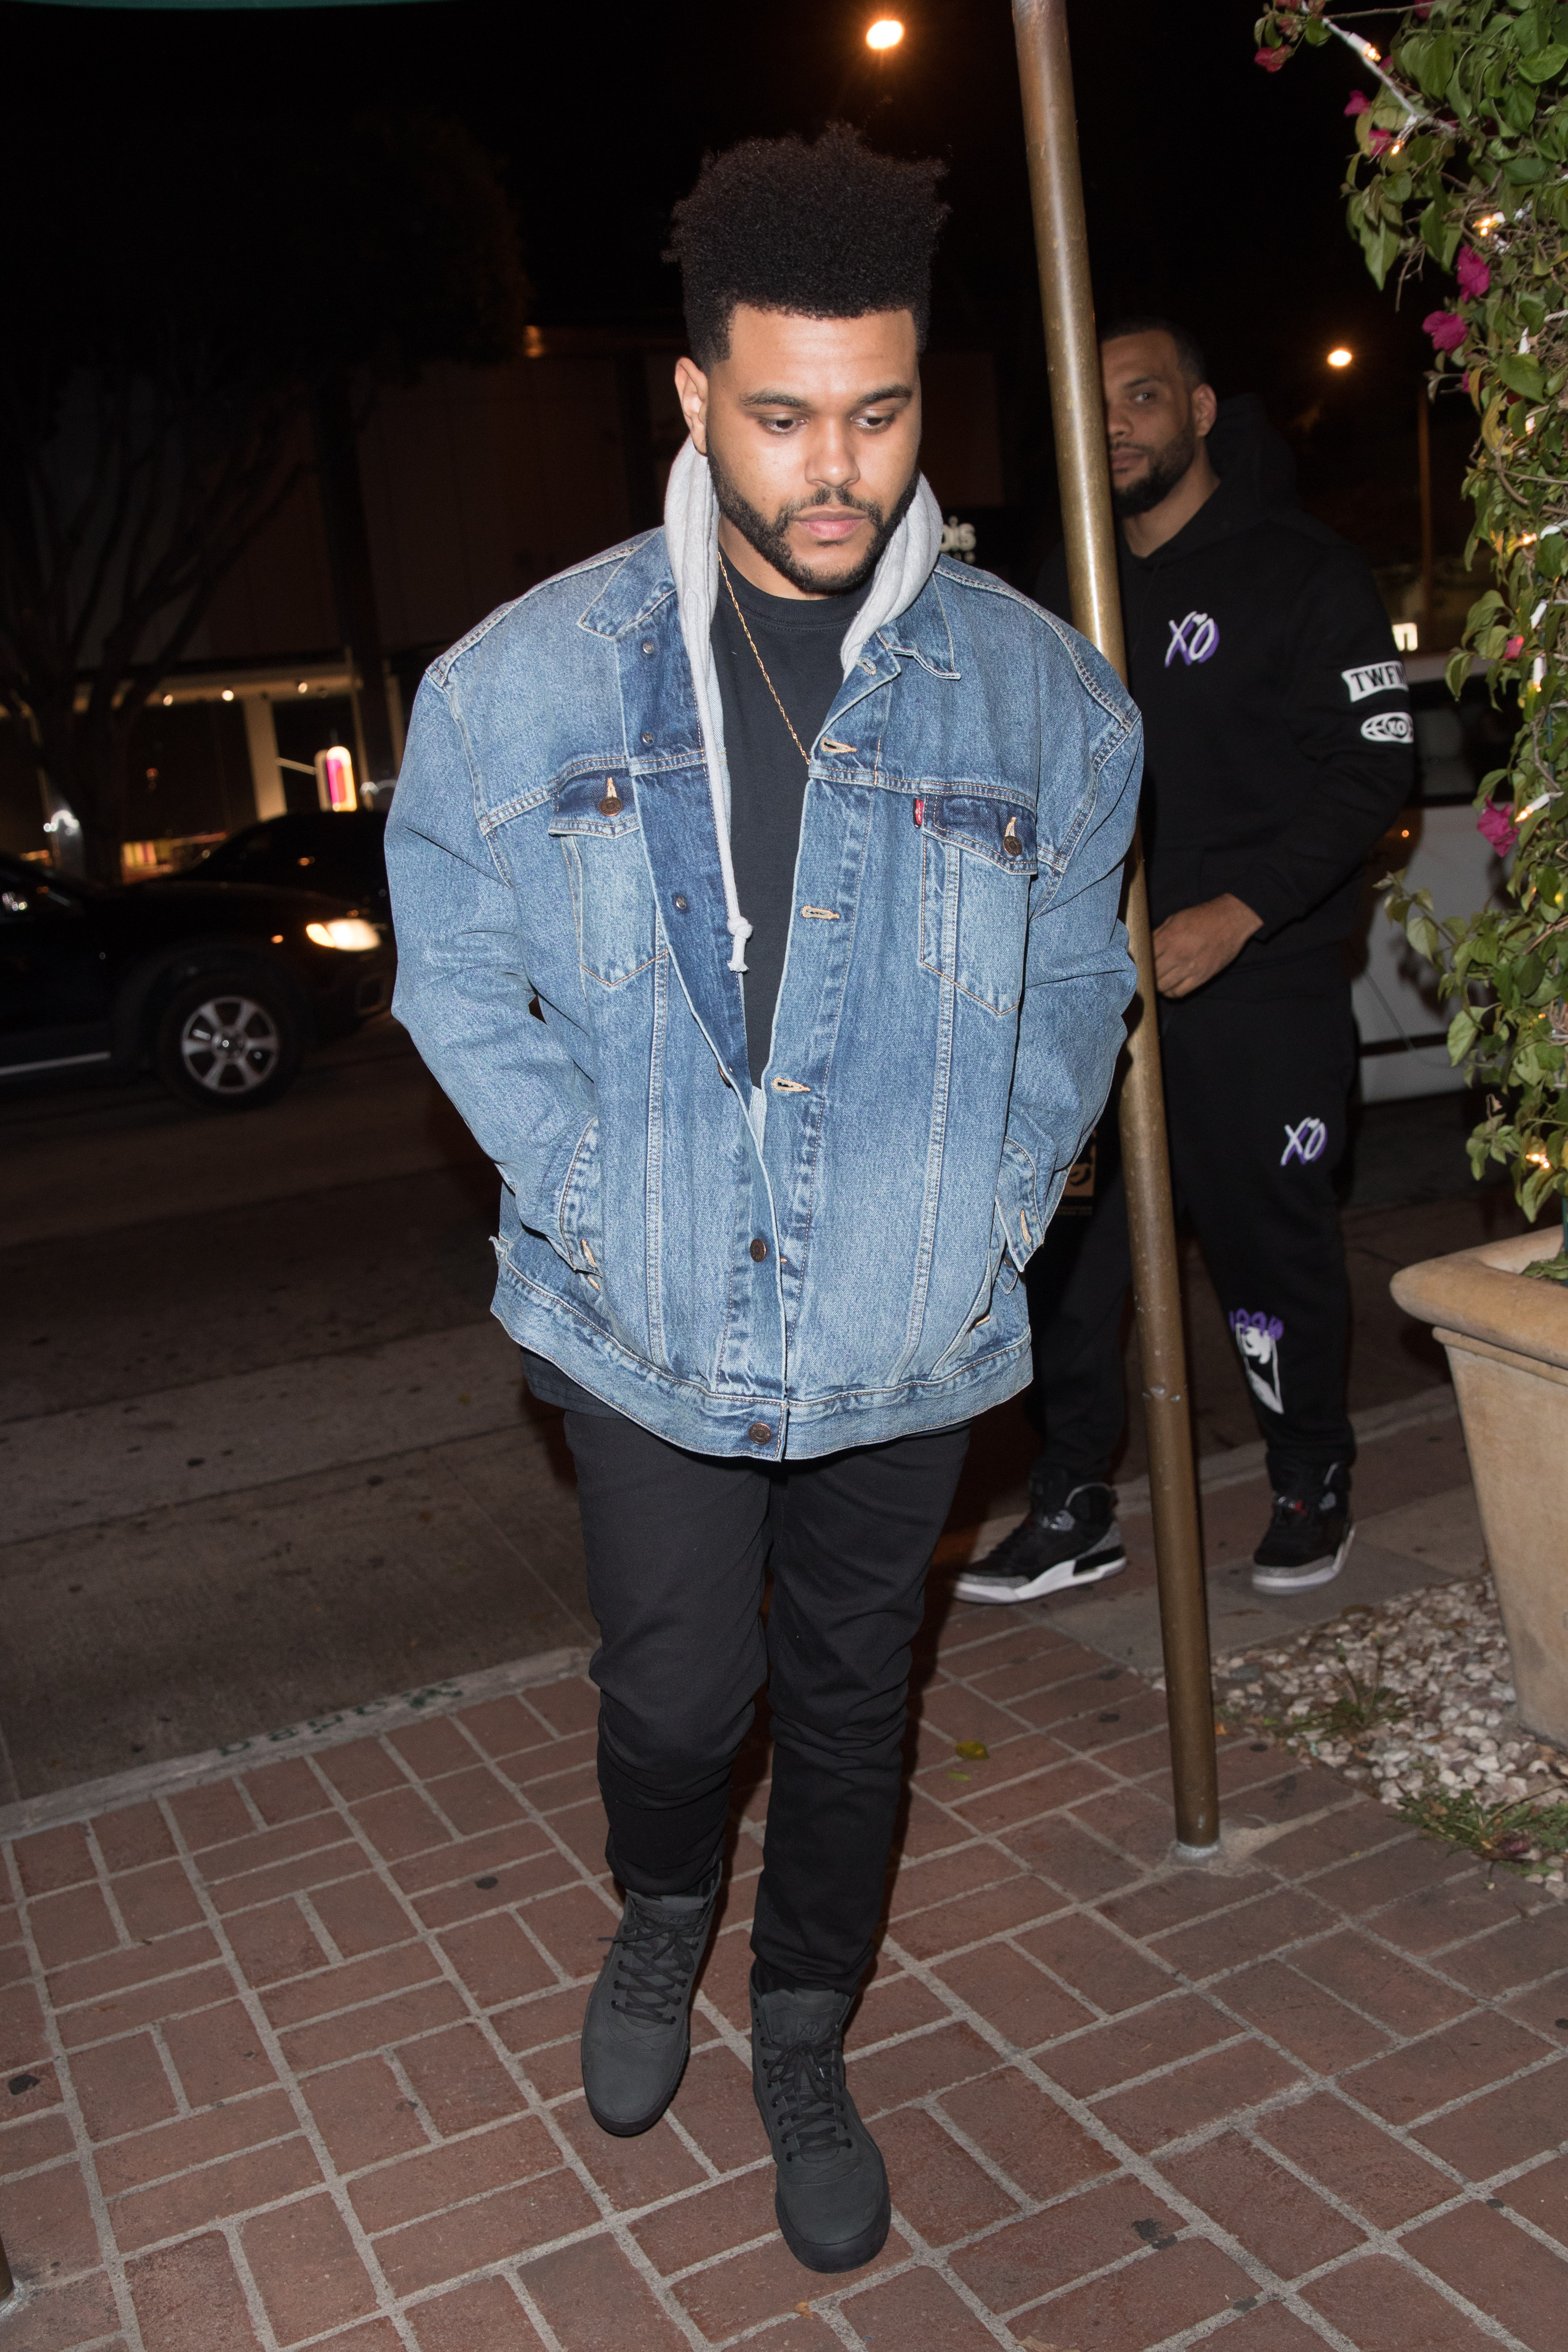 The Weeknd arriving at Madeo Restaurant to meet up